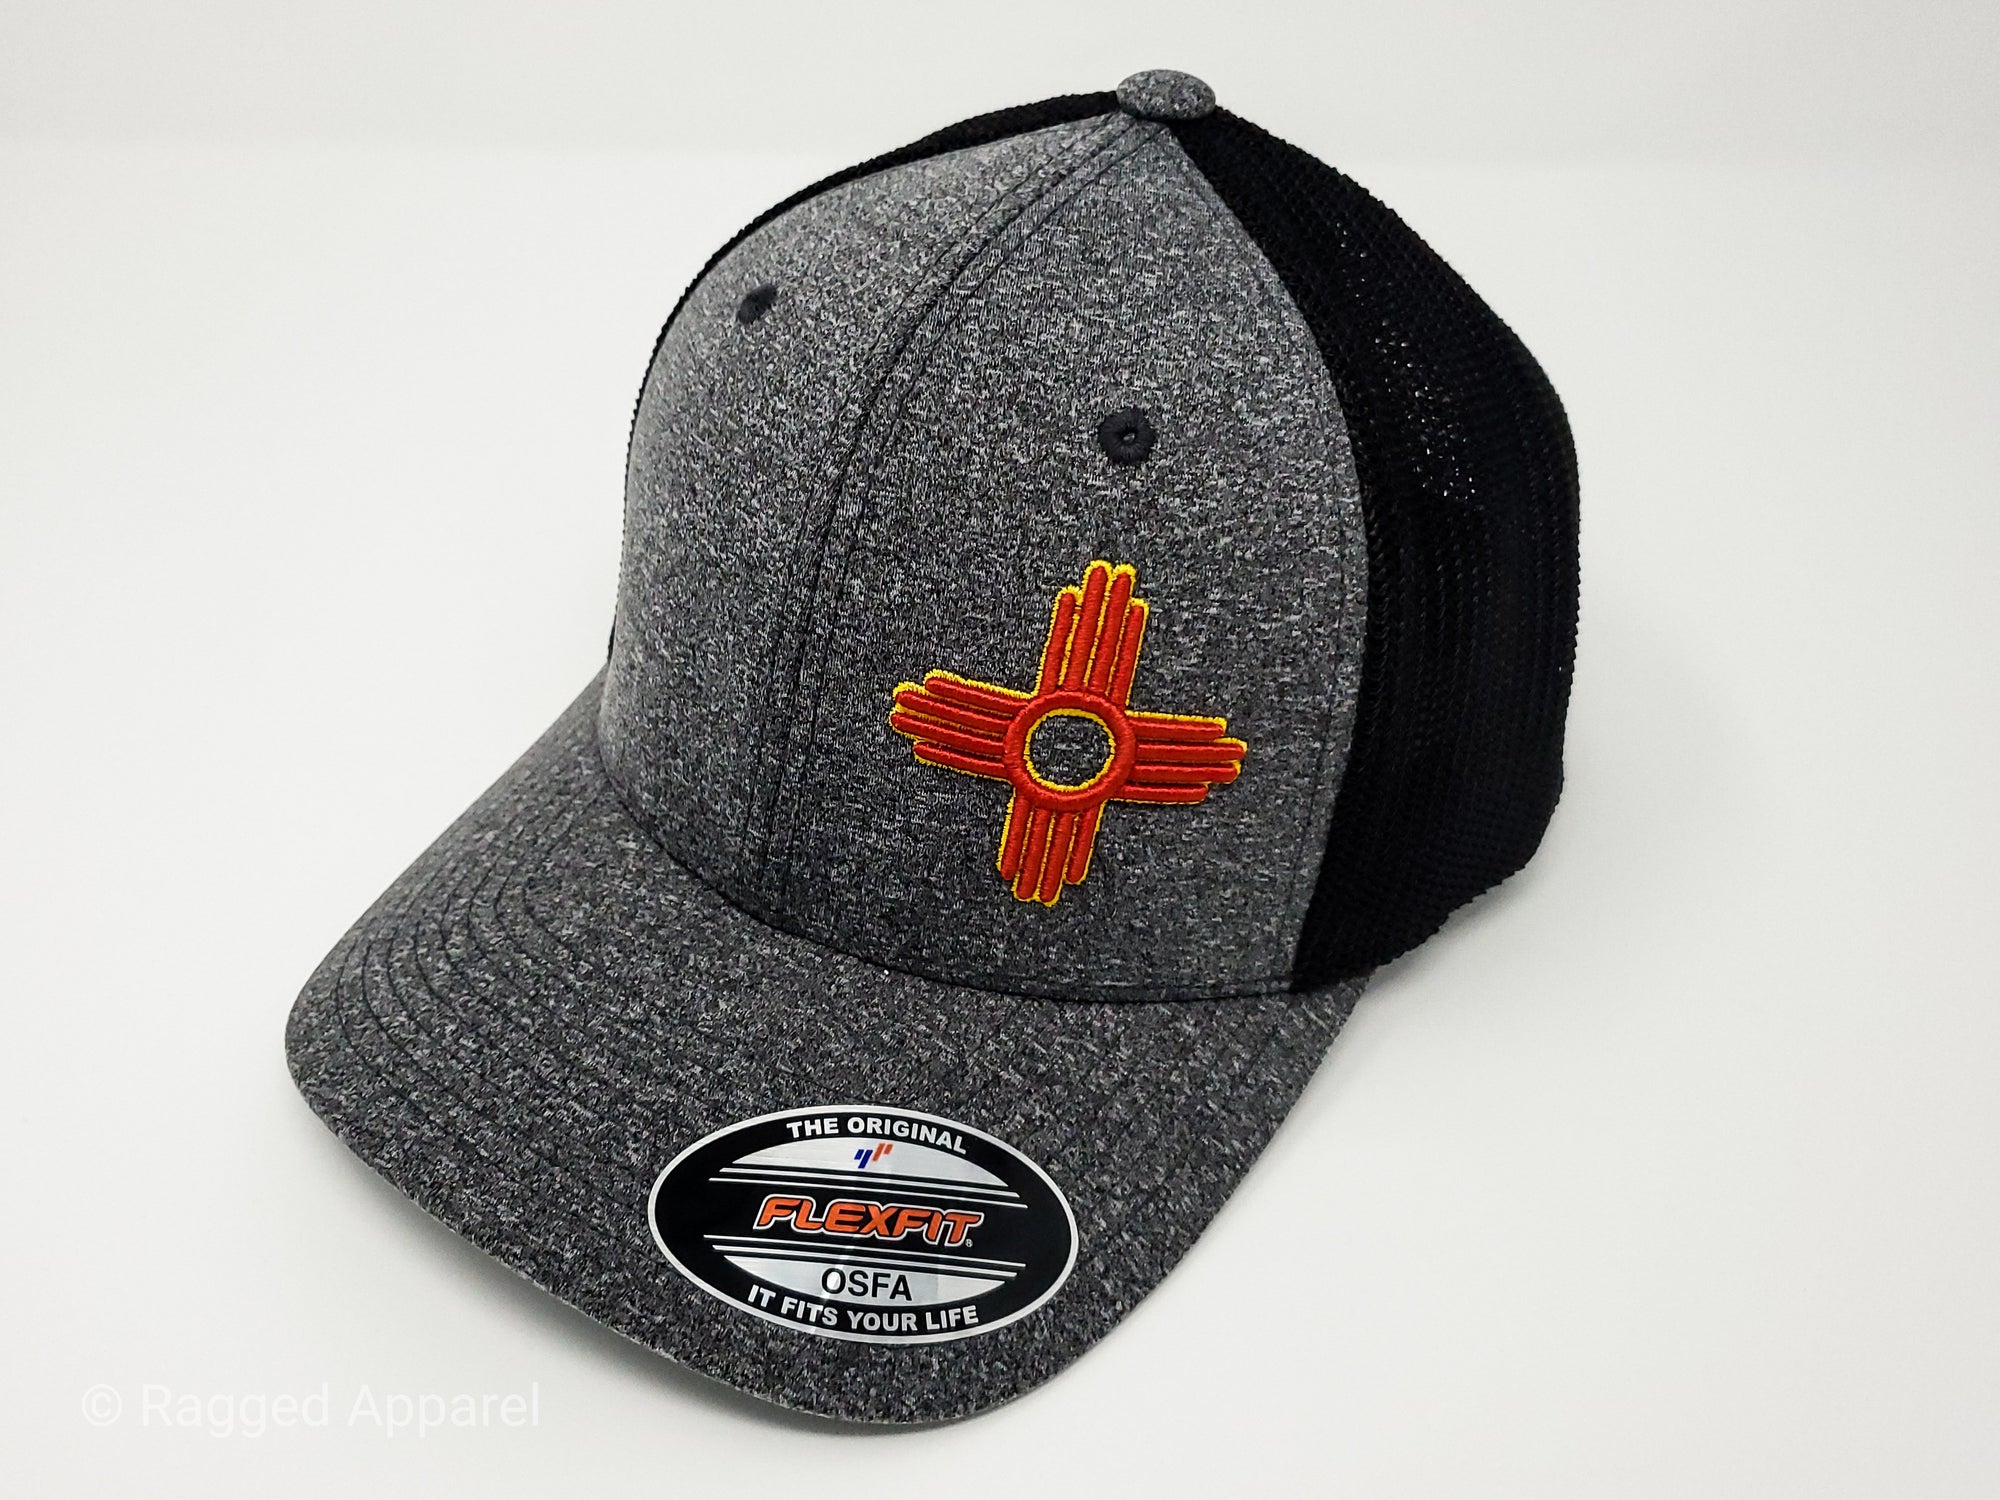 Zia Embroidered Trucker Style Hat - Ragged Apparel Screen Printing and Signs - www.nmshirts.com